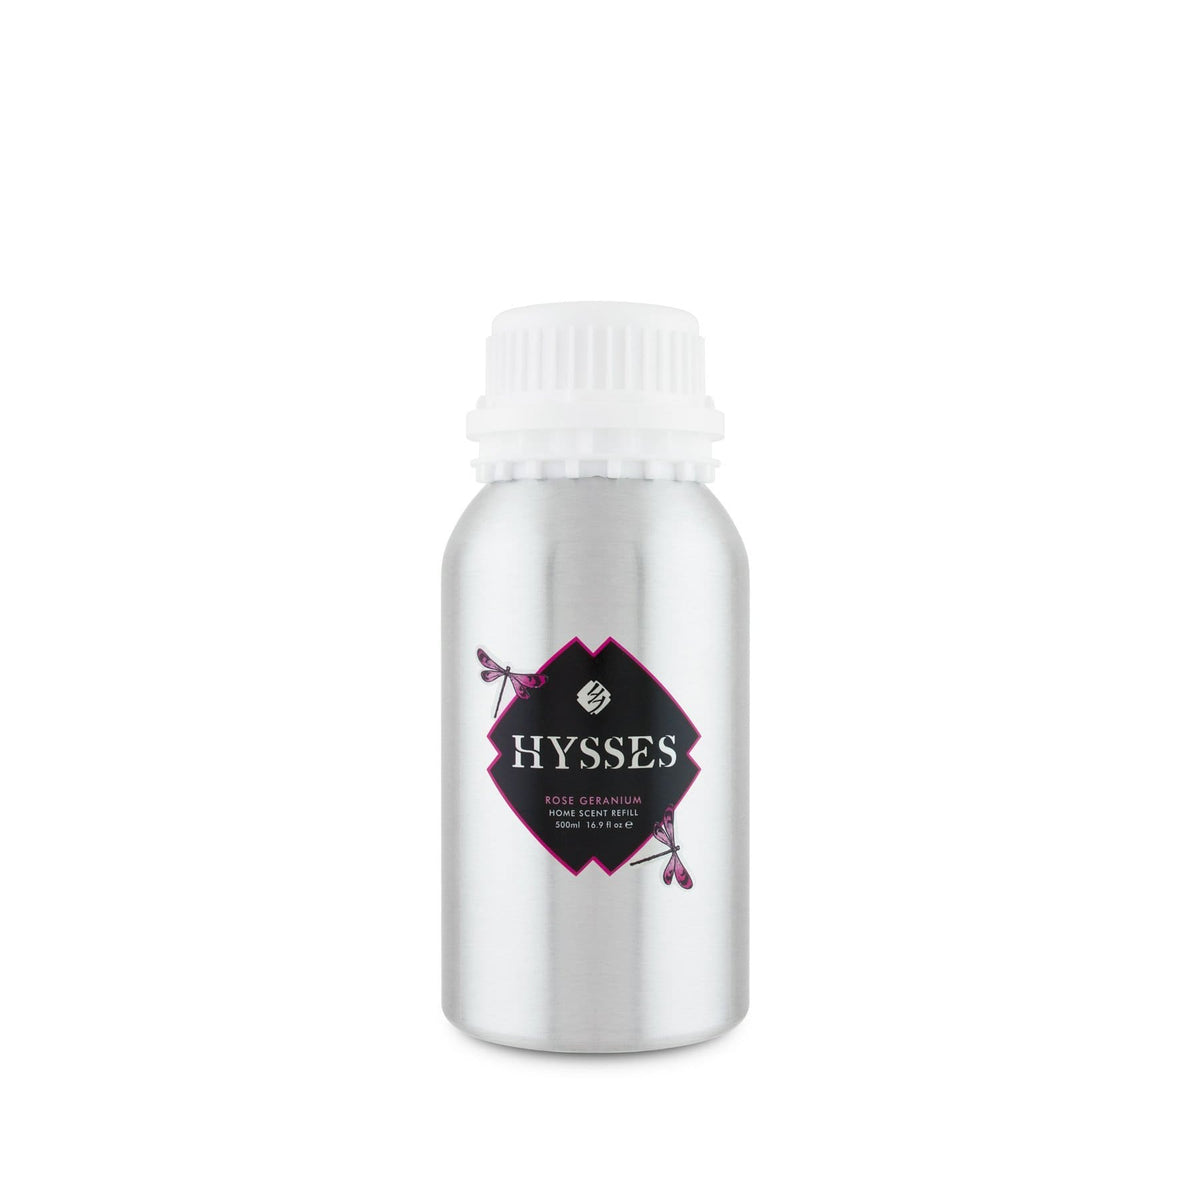 Hysses Home Scents 500ml Refill Home Scent Rose Geranium